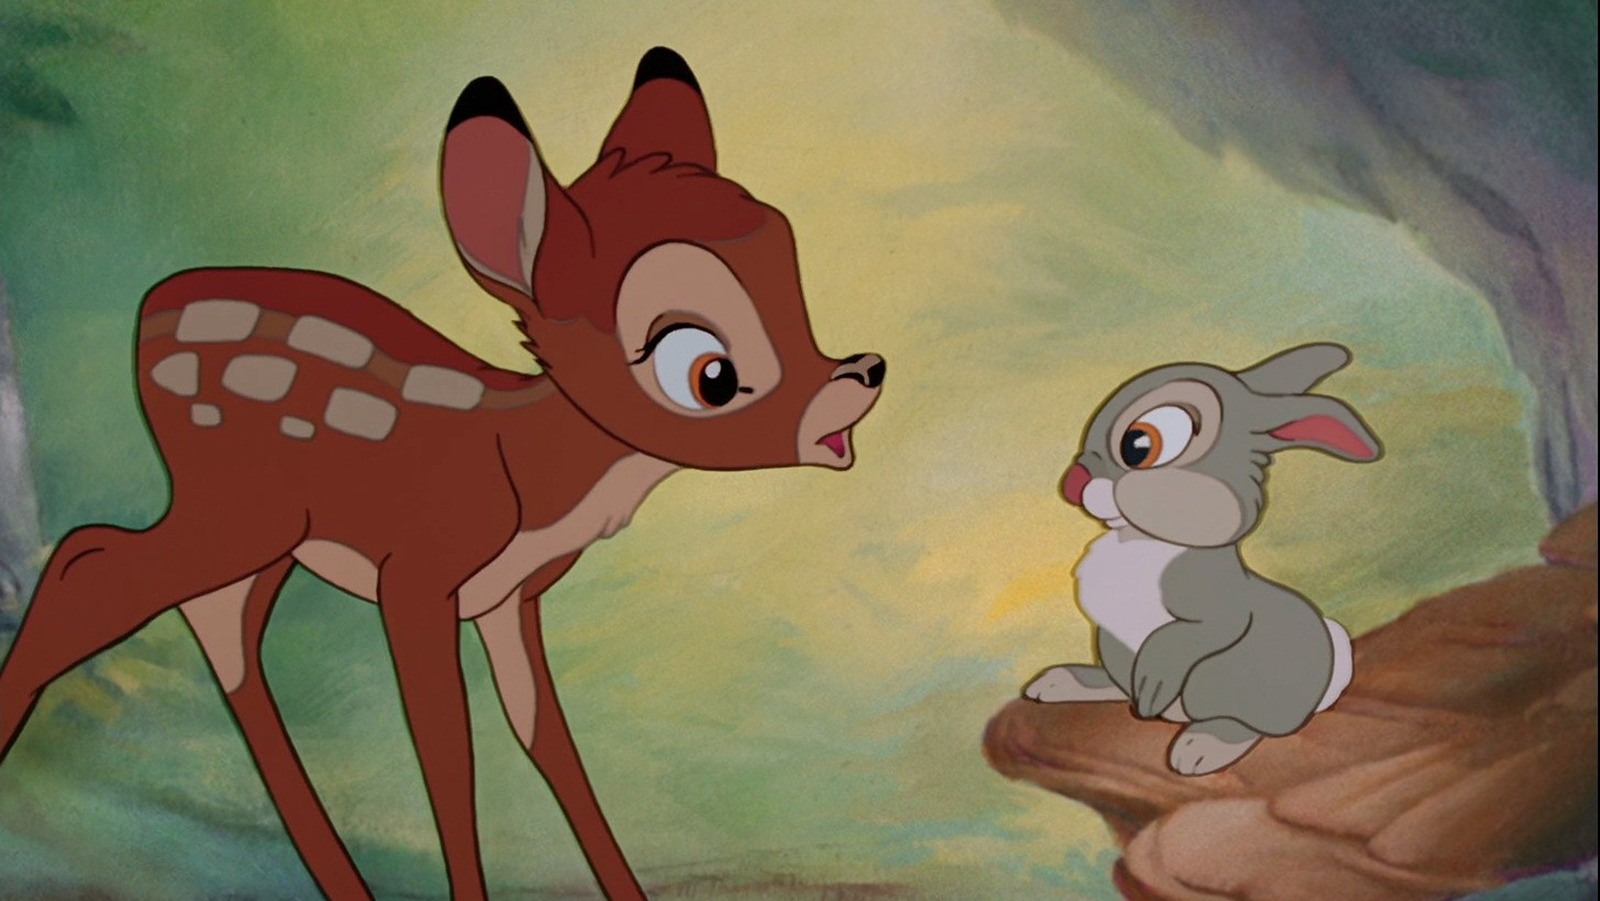 Disney’s Live-Action Bambi Remake Loses Its Oscar-Winning Director